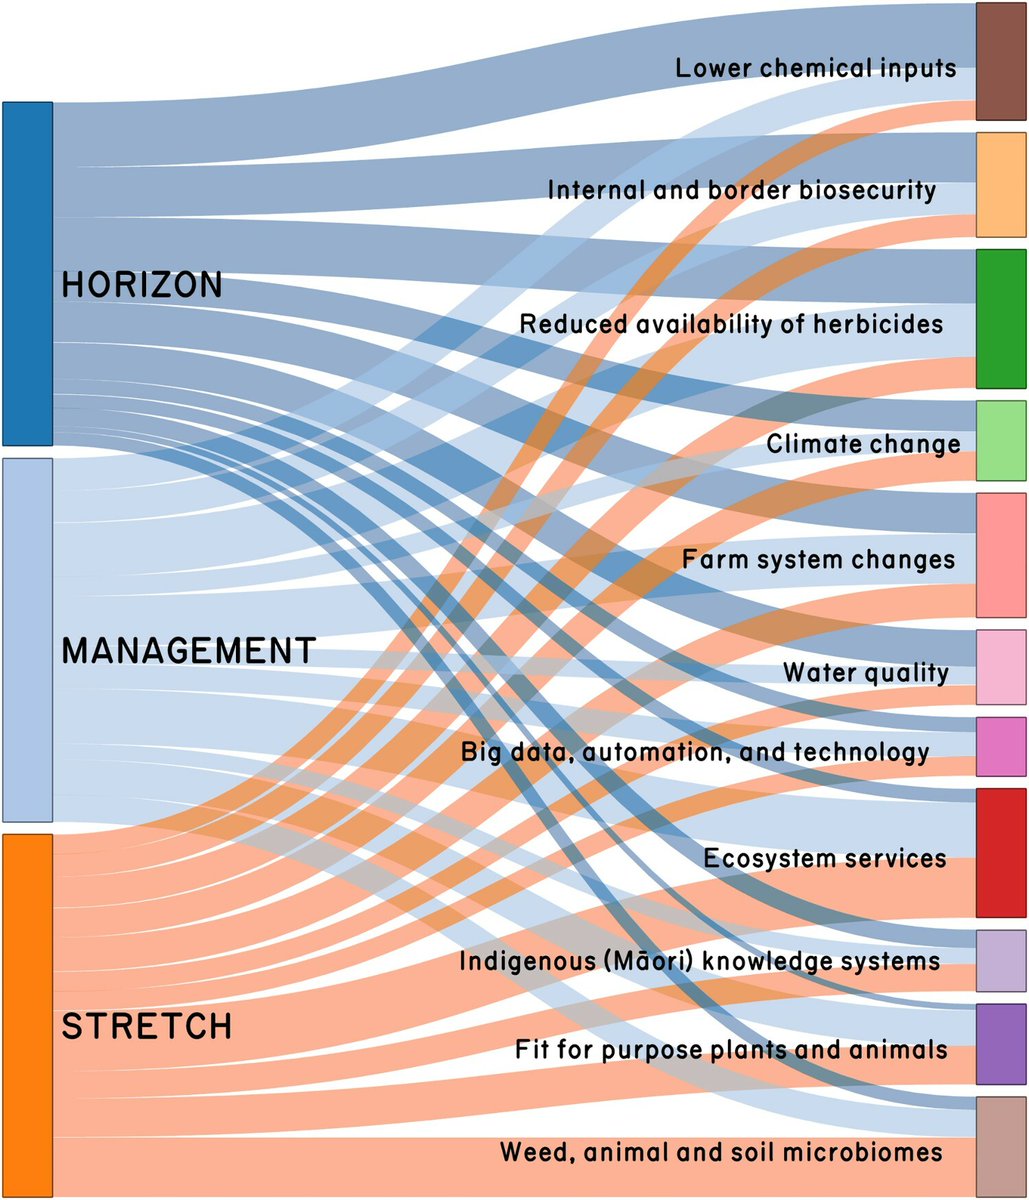 A sankey diagram showing the major drivers of innovation with rank scores for it being a emerging issue on horizon, potential to transform management, and on the stretchiness of the science.